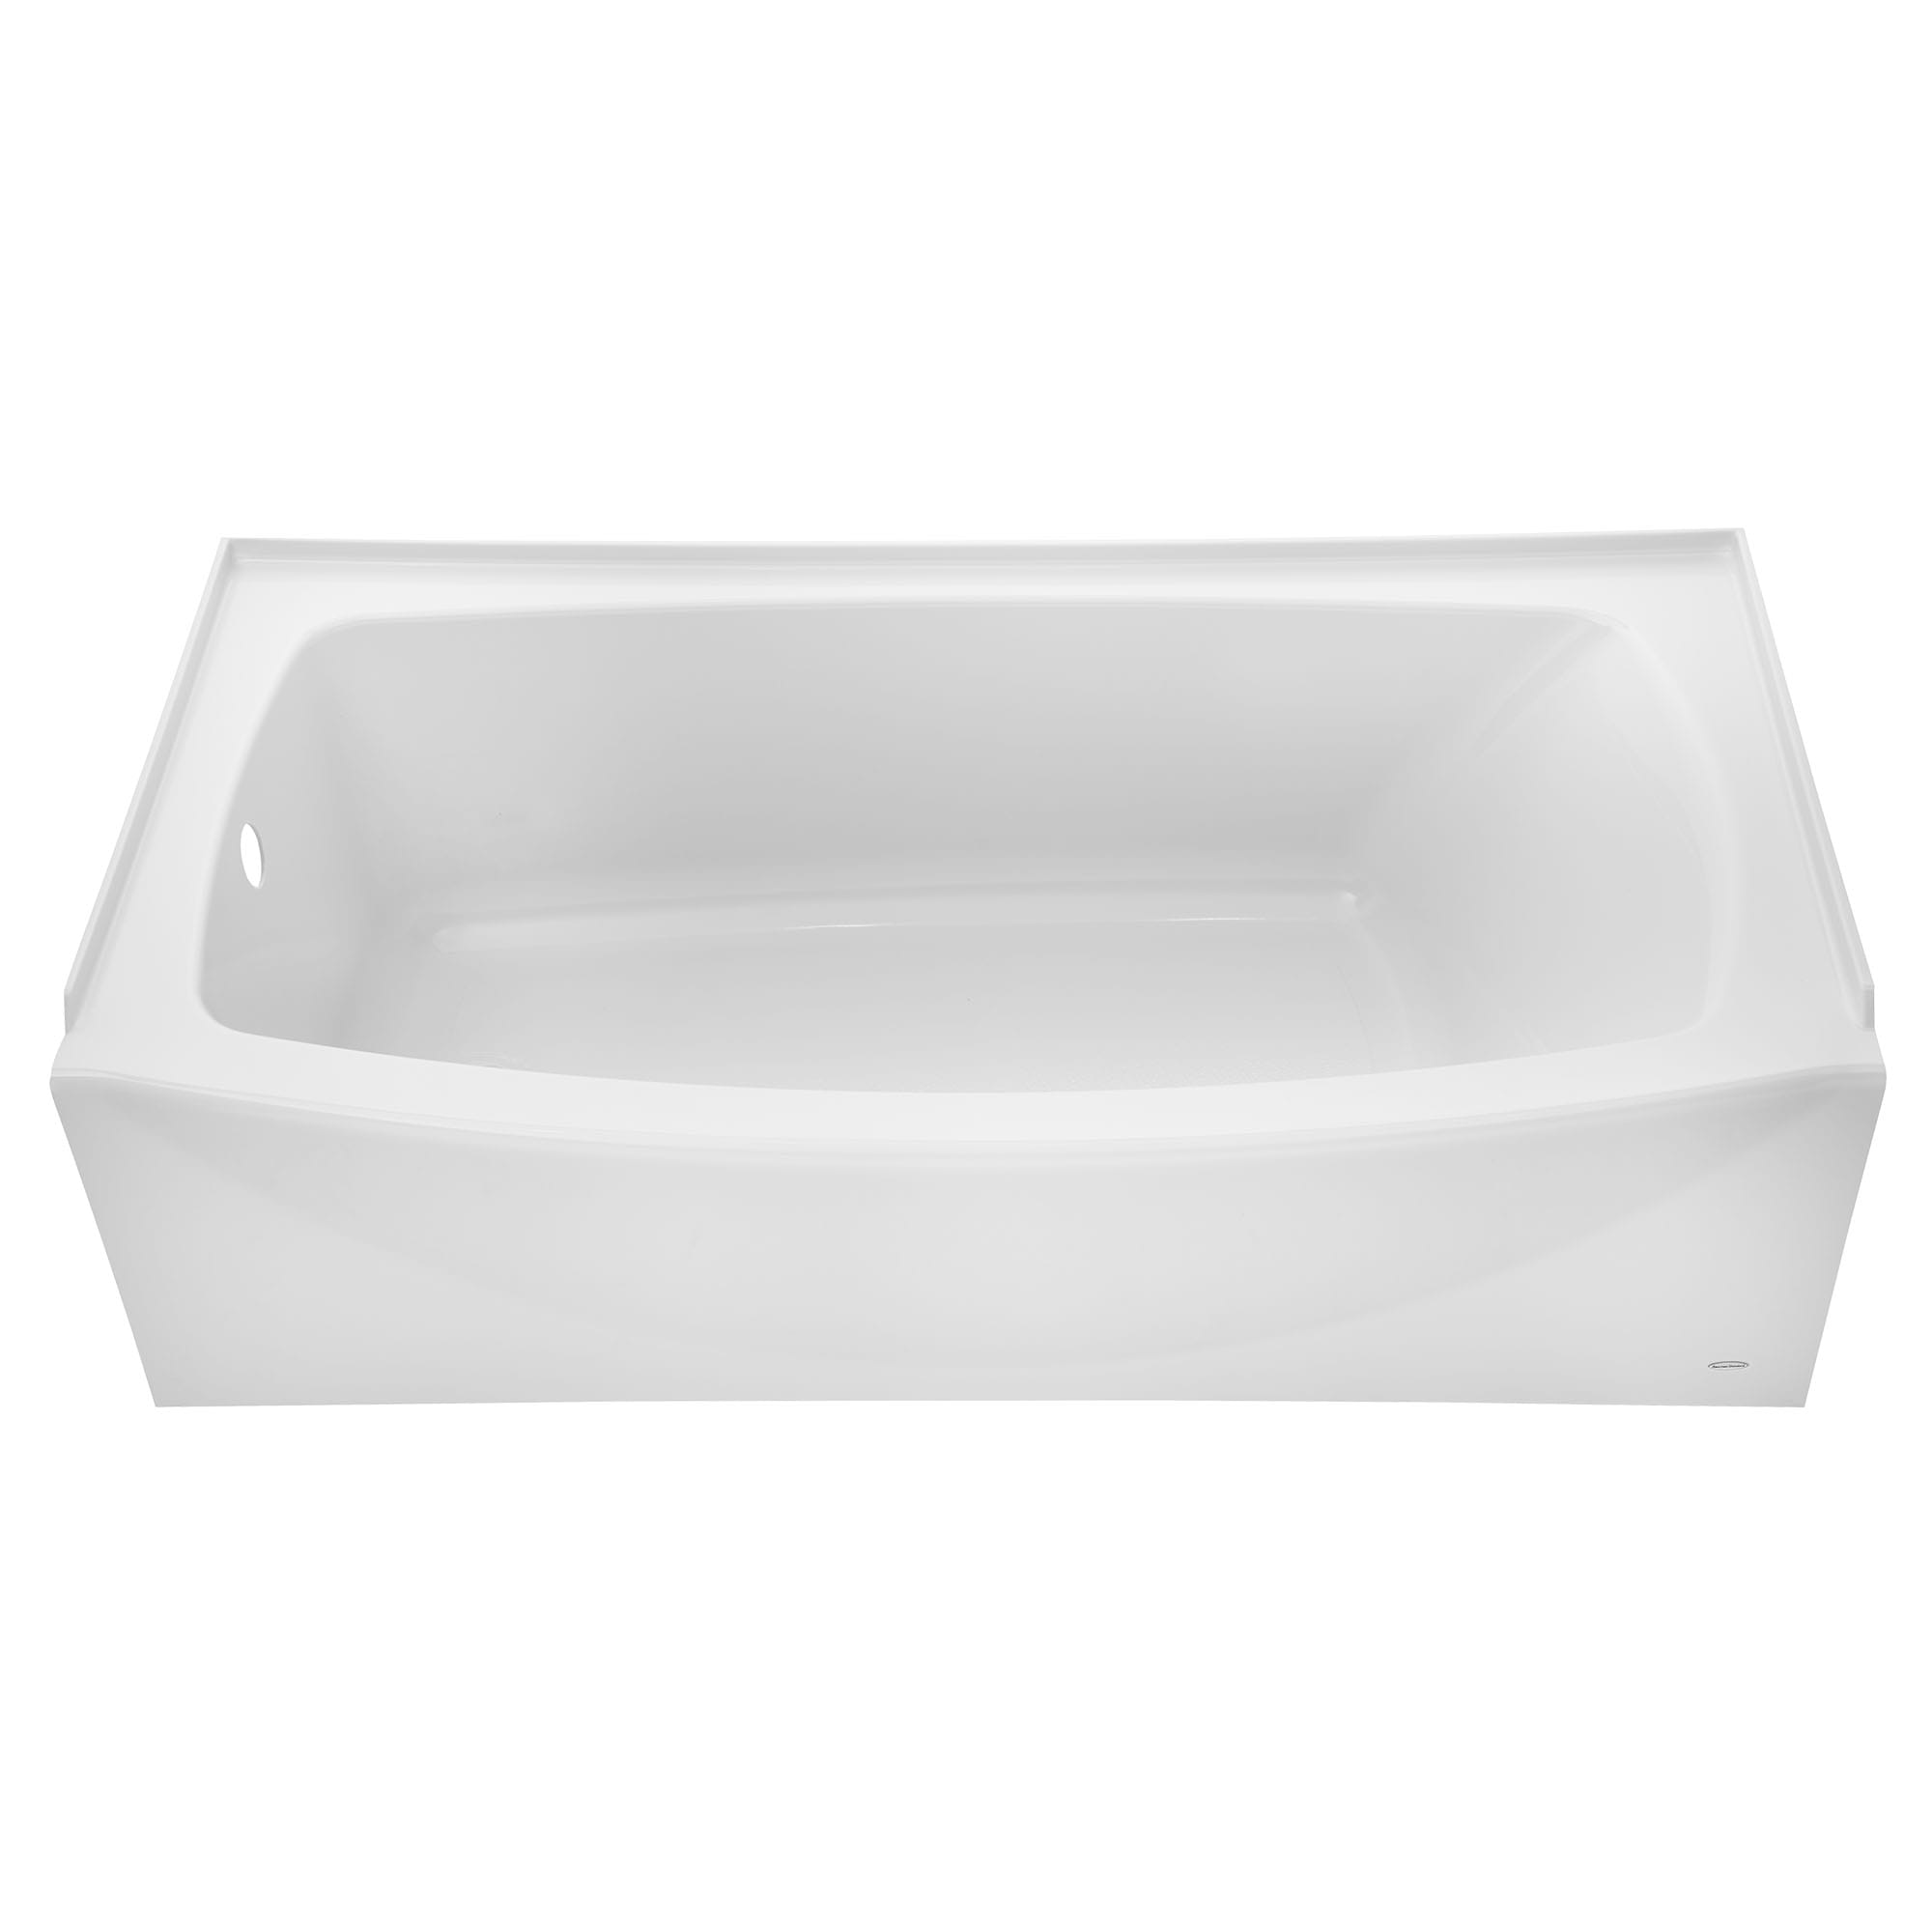 Ovation 60 x 30 Inch Integral Apron Bathtub Right Hand Outlet ARCTIC